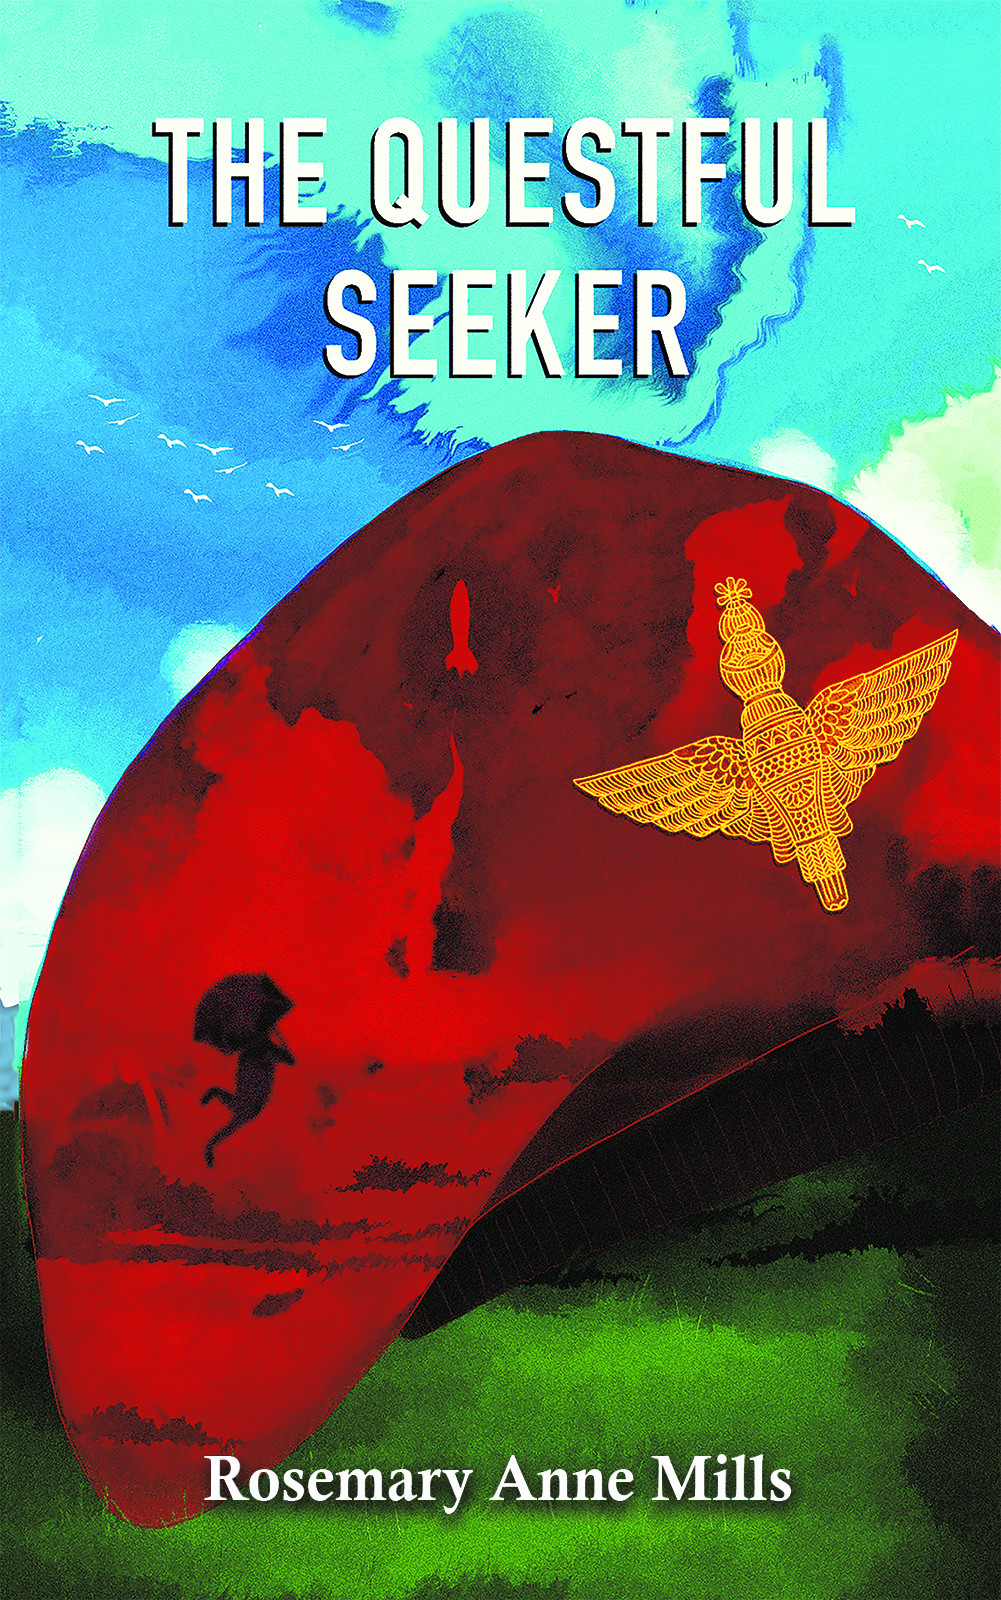 This image is the cover for the book The Questful Seeker